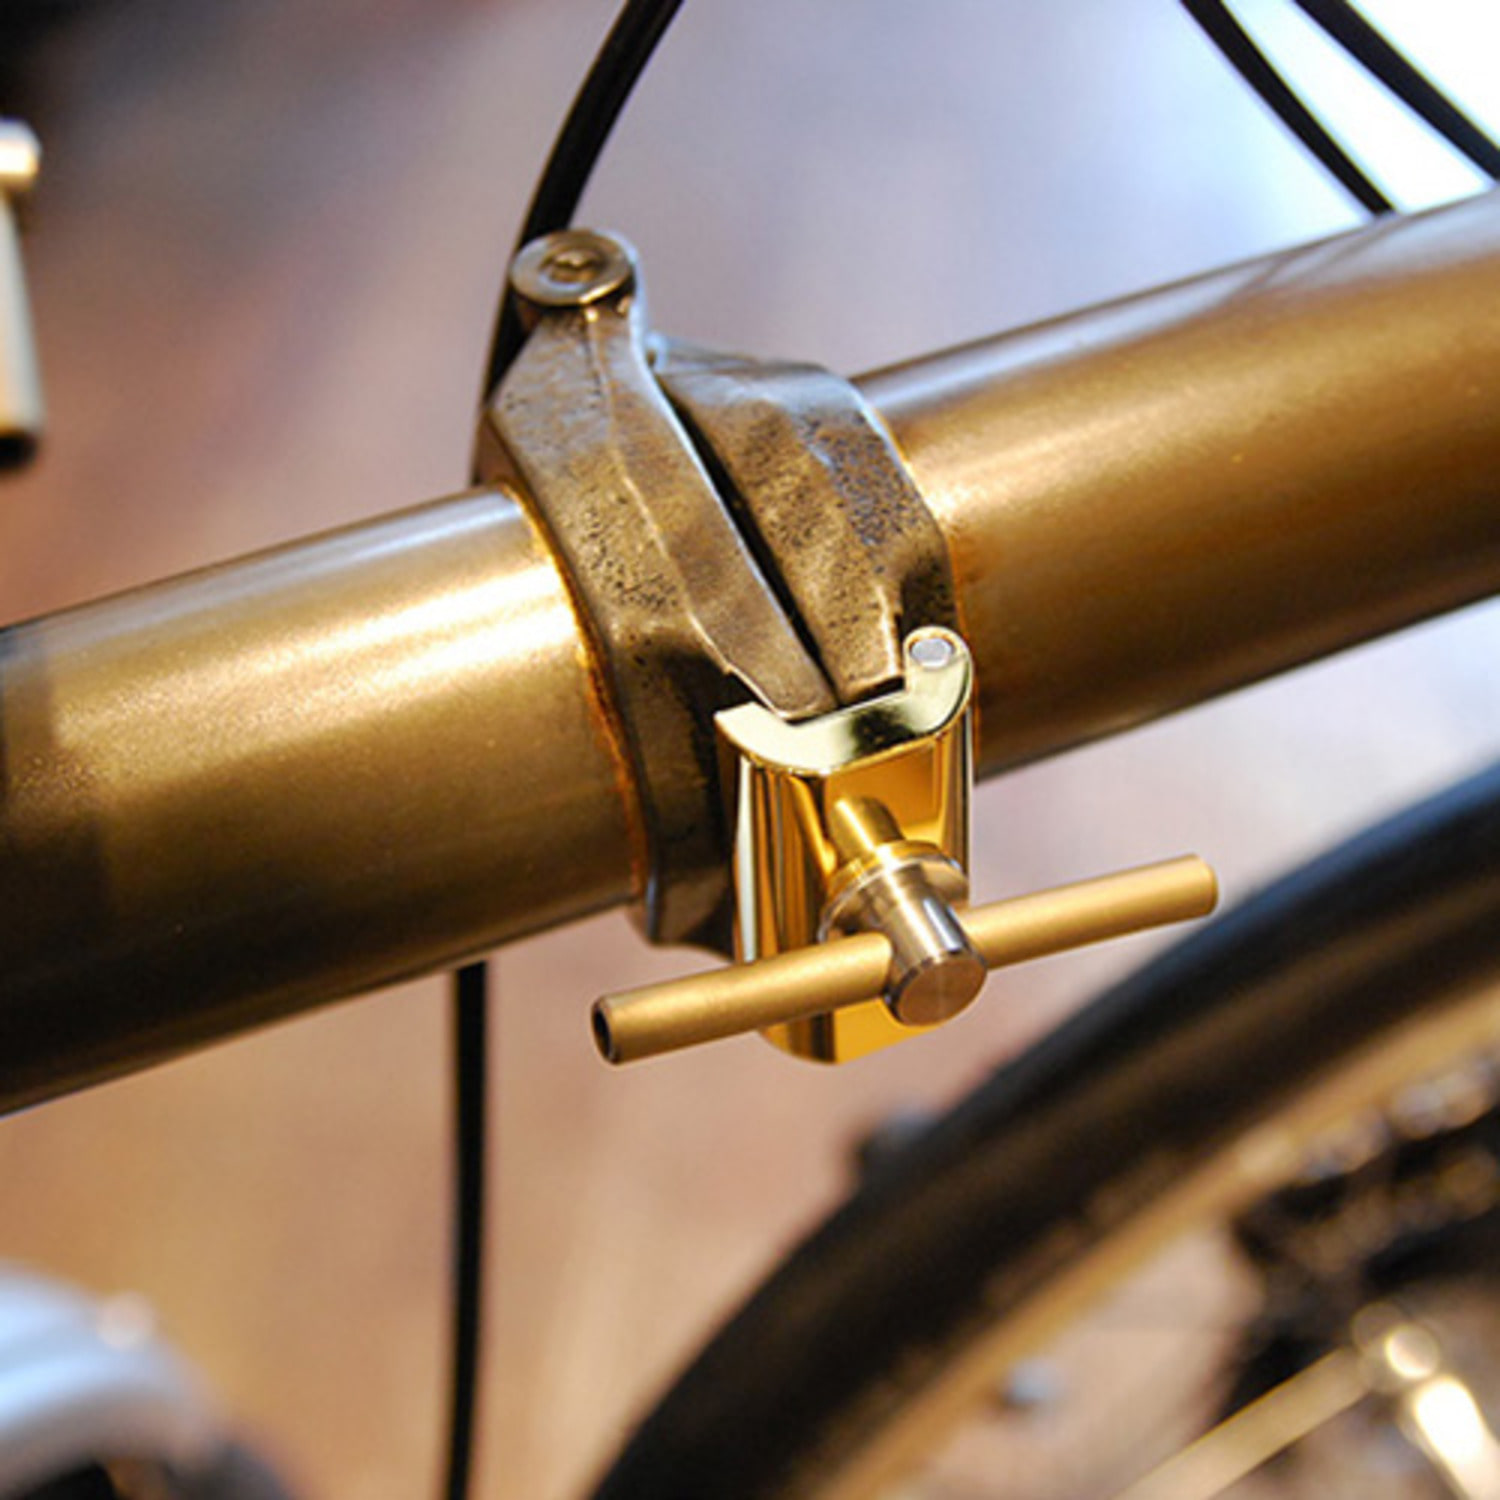 nov101 for Brompton Details about   nov Titanium+Carbon easy shell Clamps Lever series v.2.0 